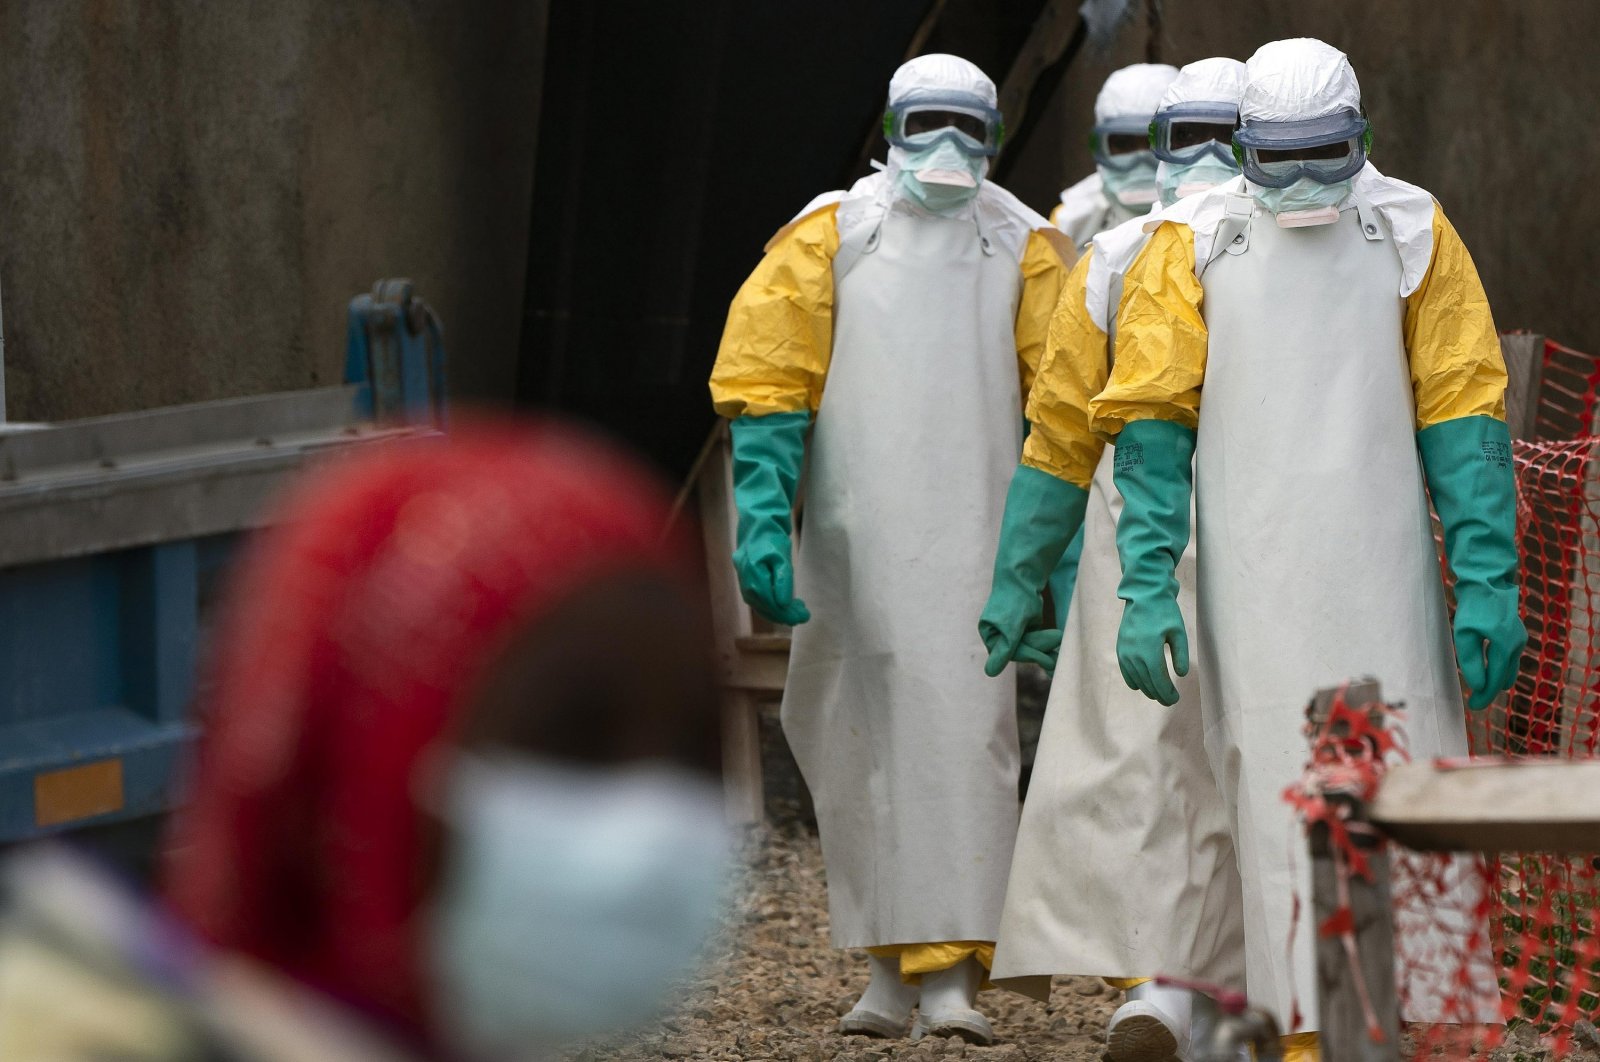 Health workers dressed in protective gear begin their shift at an Ebola treatment center in Beni, Democratic Republic of Congo, July 16, 2019. (AP Photo)